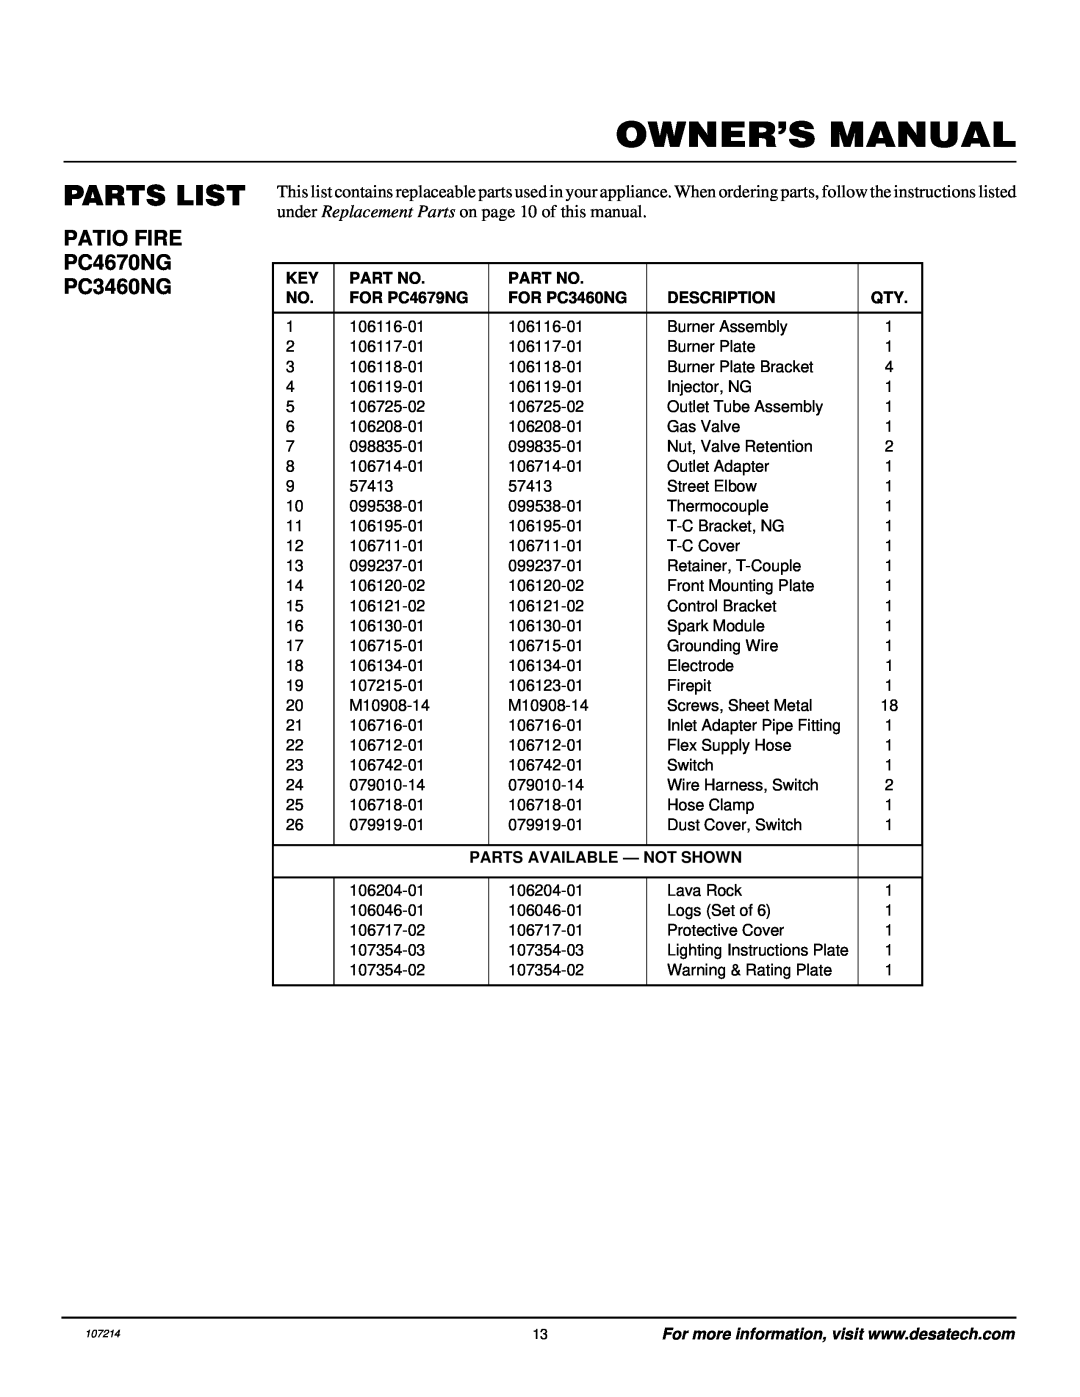 Desa Tech PC4670NG Parts List, Owner’S Manual, FOR PC4679NG, FOR PC3460NG, Description, Parts Available - Not Shown 